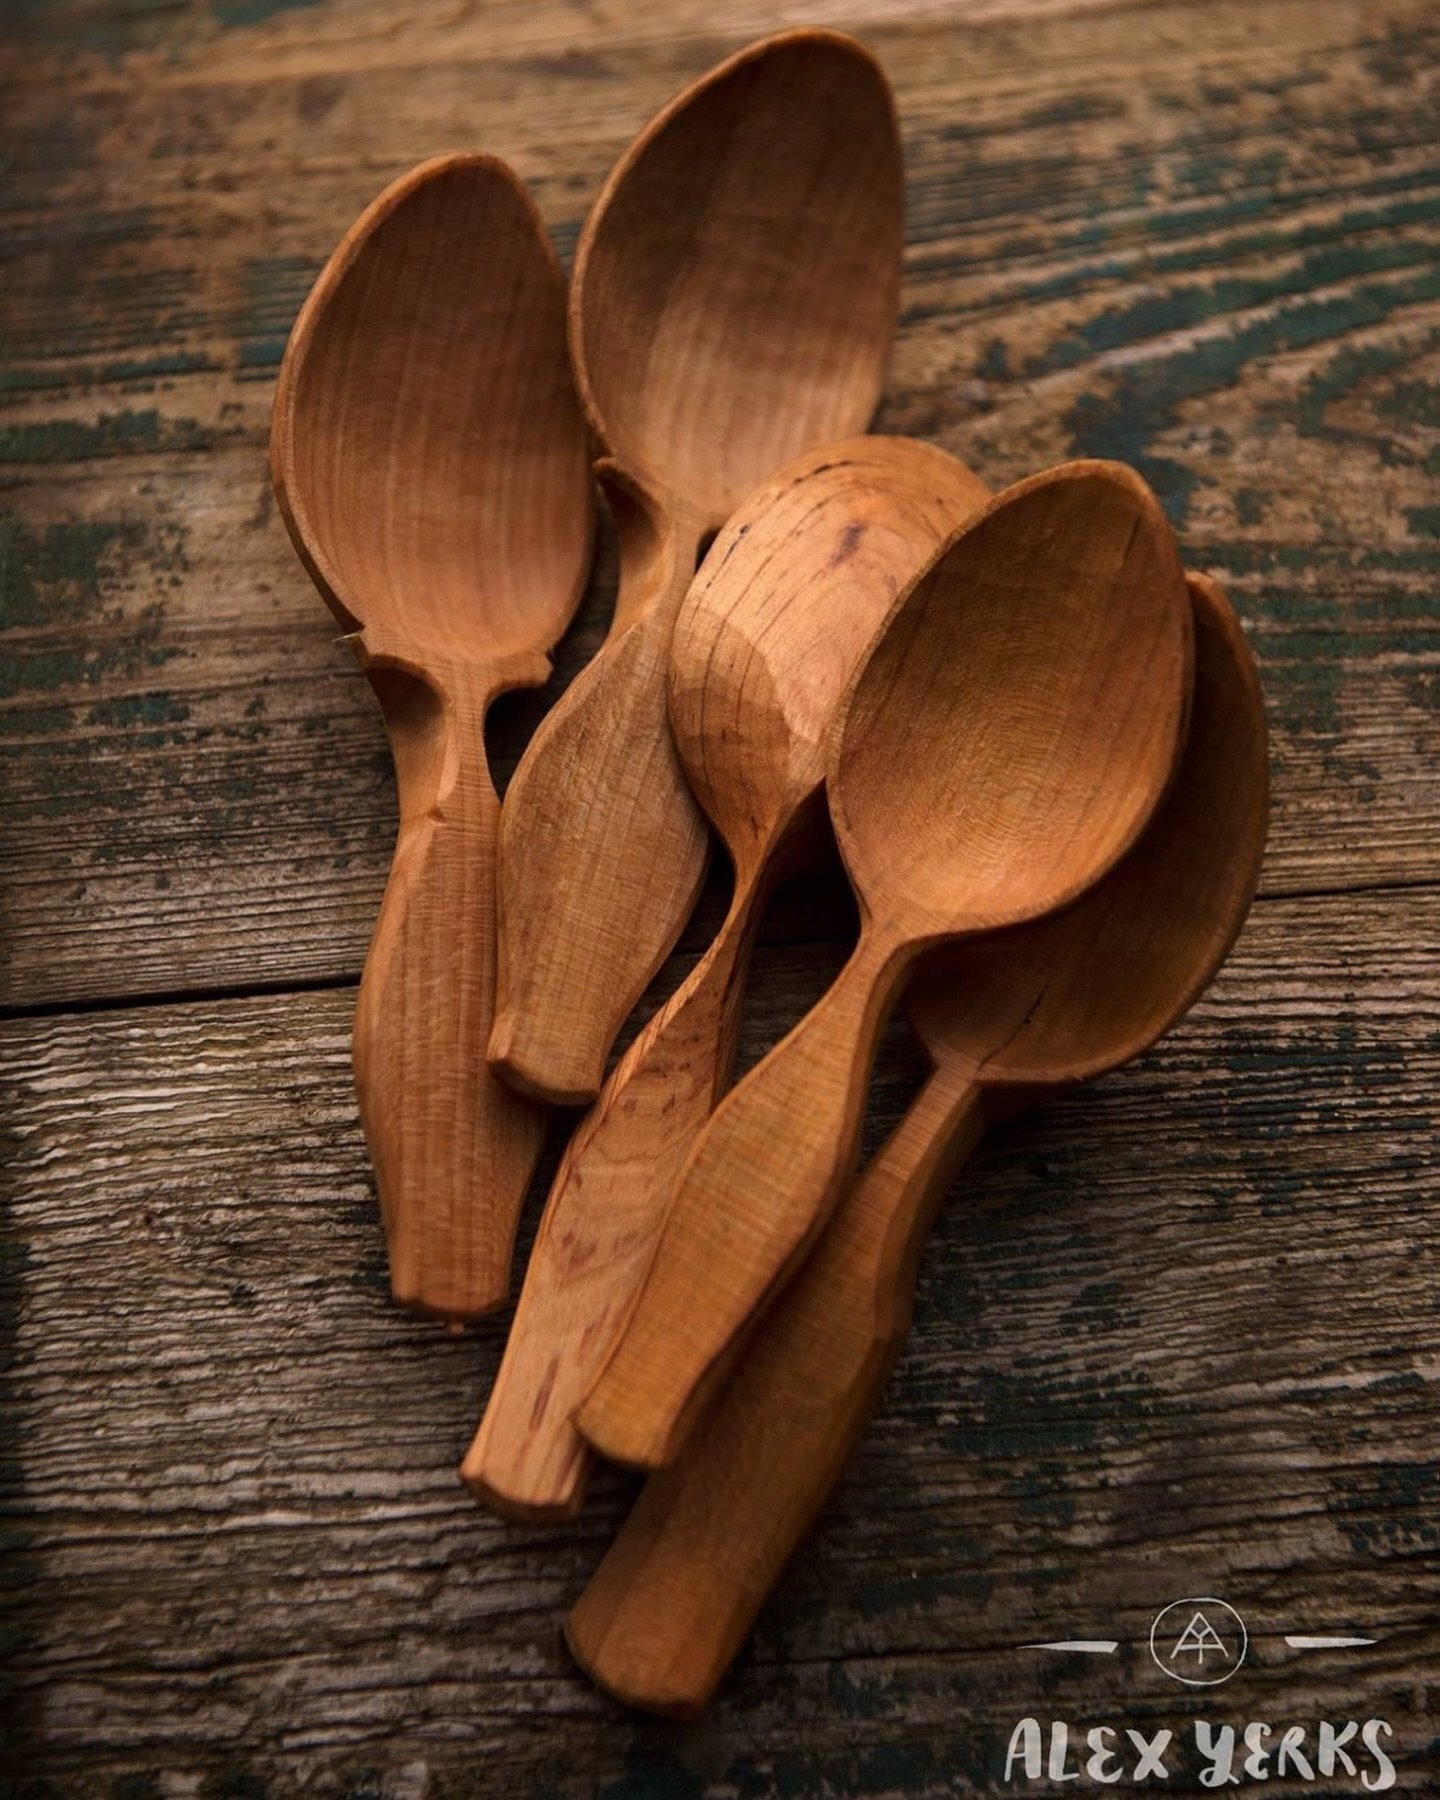 Are you a beginner who&rsquo;s signed up for The Spoon Gathering? We&rsquo;re trying to encourage new carvers like yourself to take a class to learn tips, tricks, and safety techniques using an axe &amp; knife.

If you&rsquo;re interested in a class 